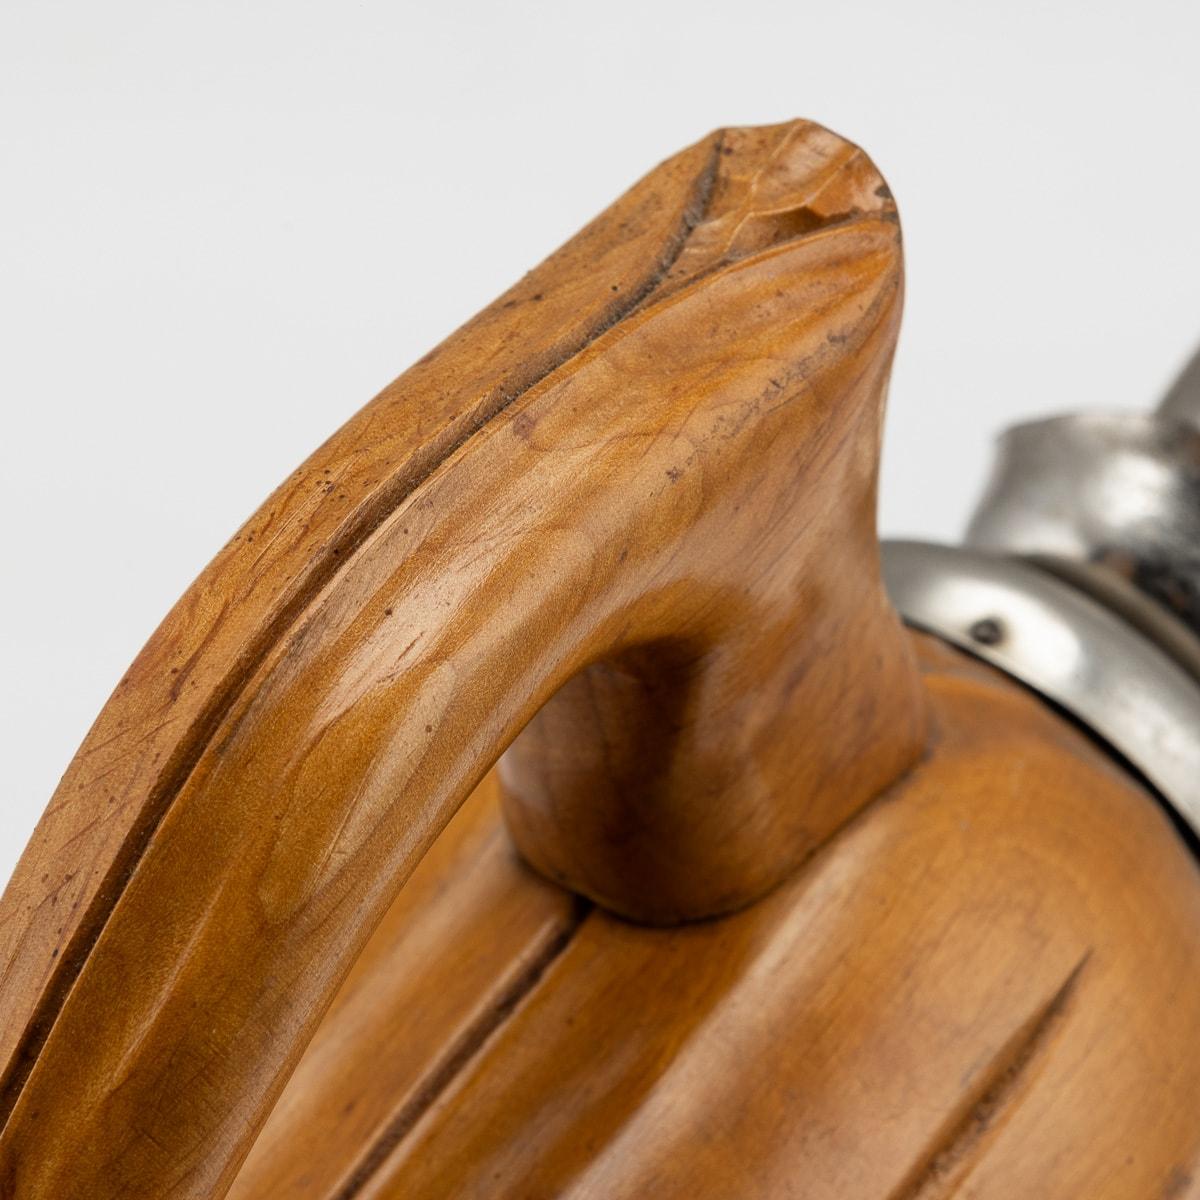 20th Century Italian Wooden Flask By Aldo Tura For Macabo c.1960 For Sale 5